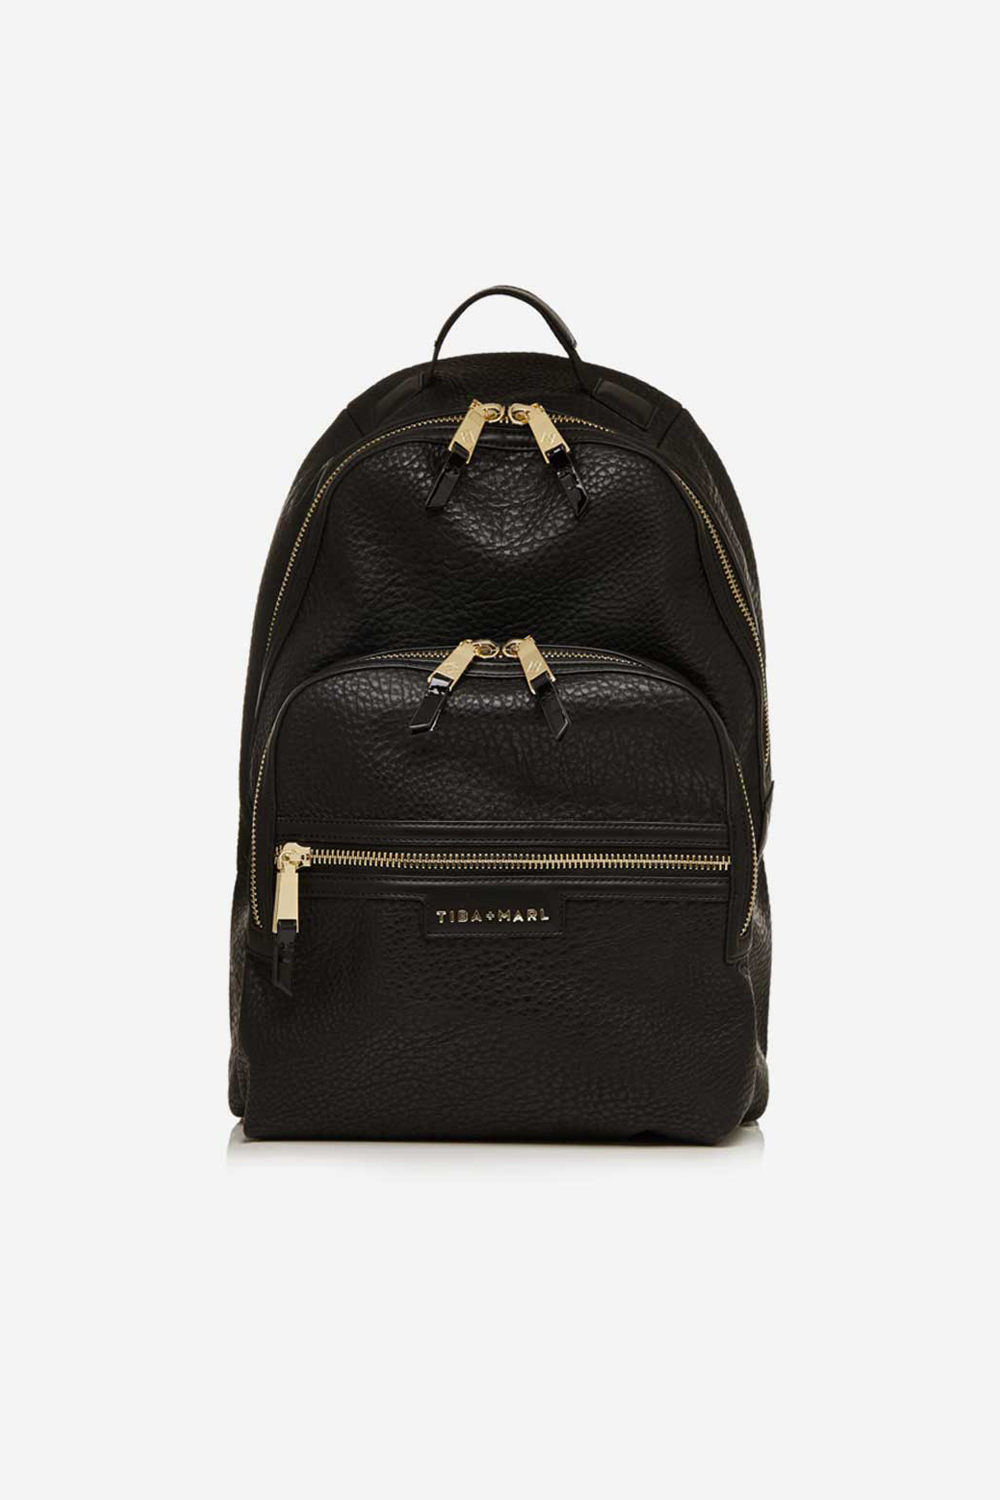 Tiba + Marl – Elwood Backpack Black / Gold *FAULT – POCKET STITCHING REPAIRED / SMALL MARK